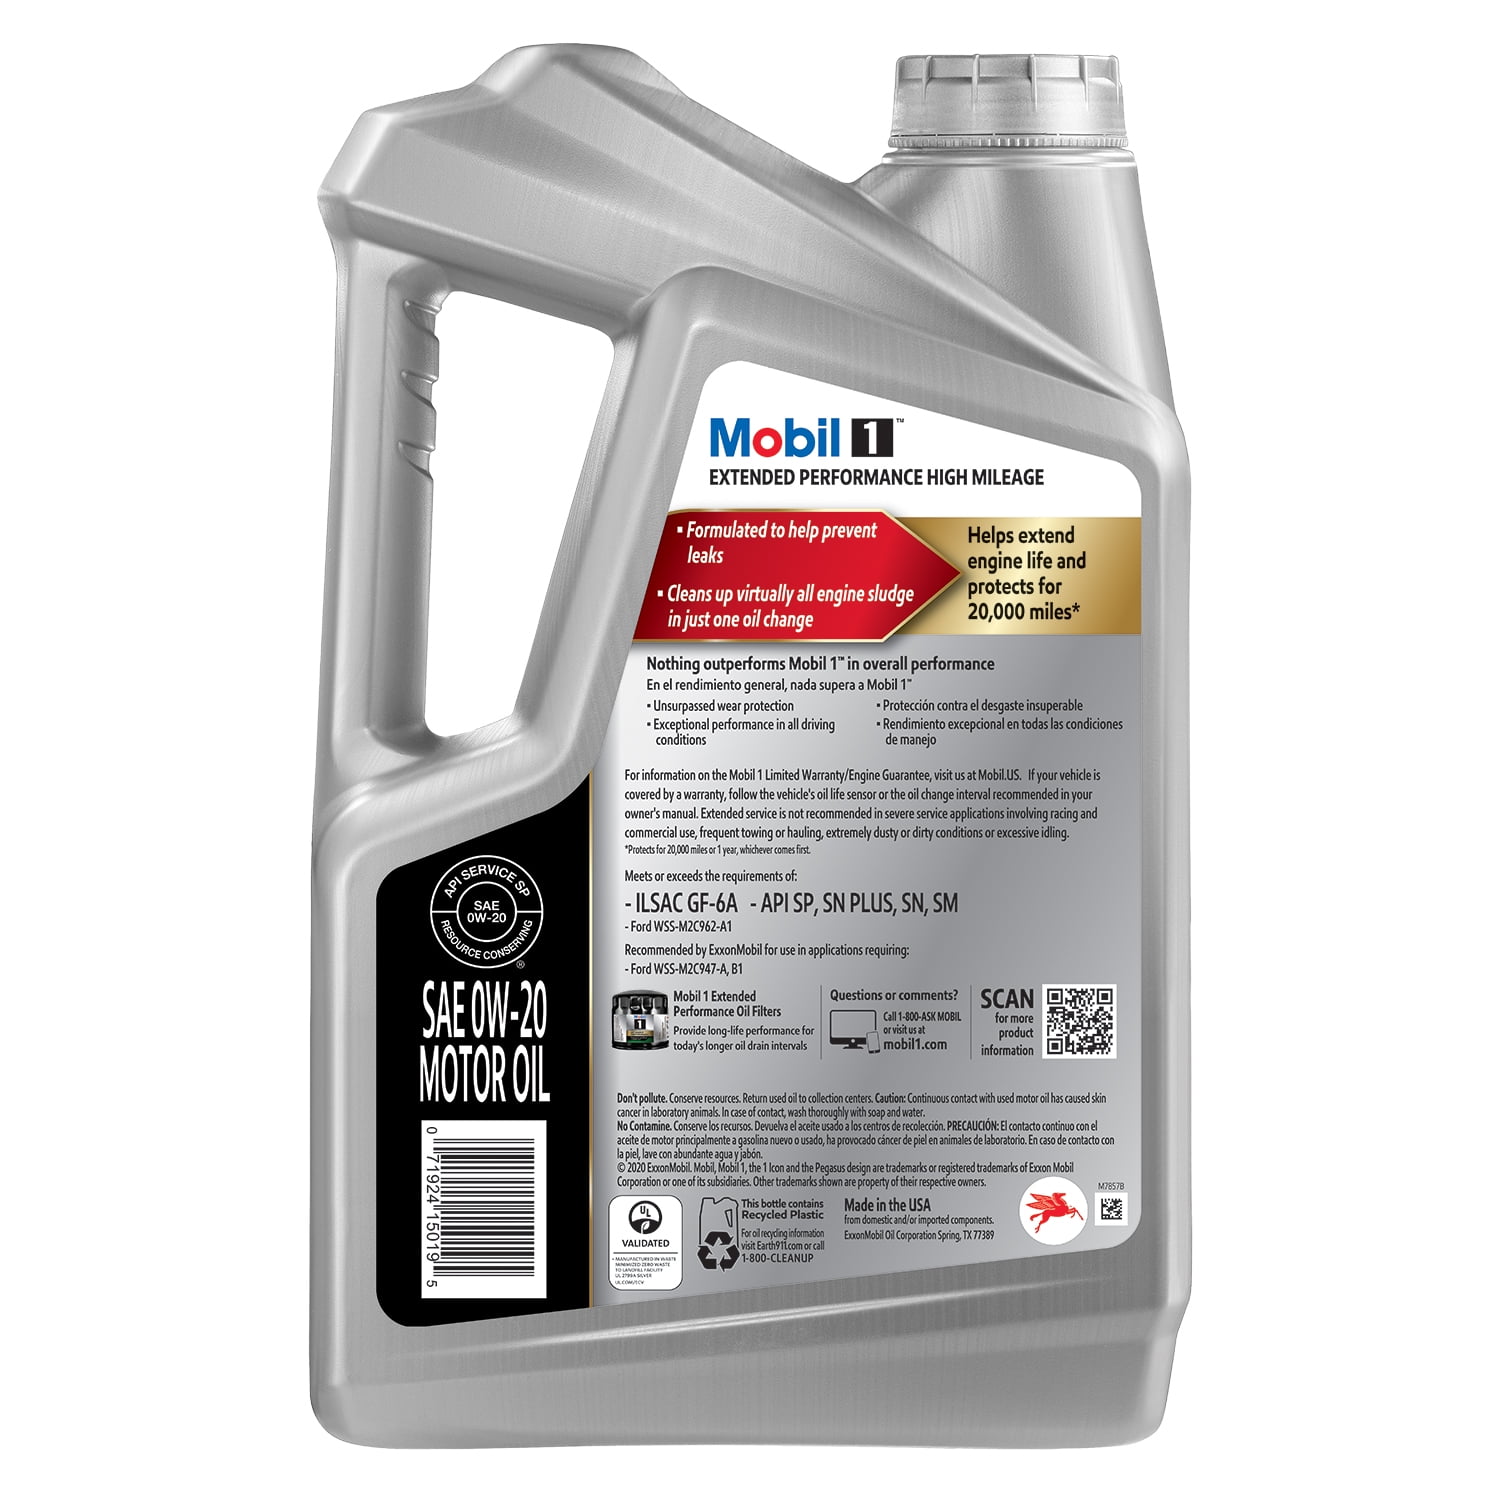 Mobil 1 Extended Performance High Mileage Full Synthetic Motor Oil 0W-20, 5 qt (3 Pack) - 2